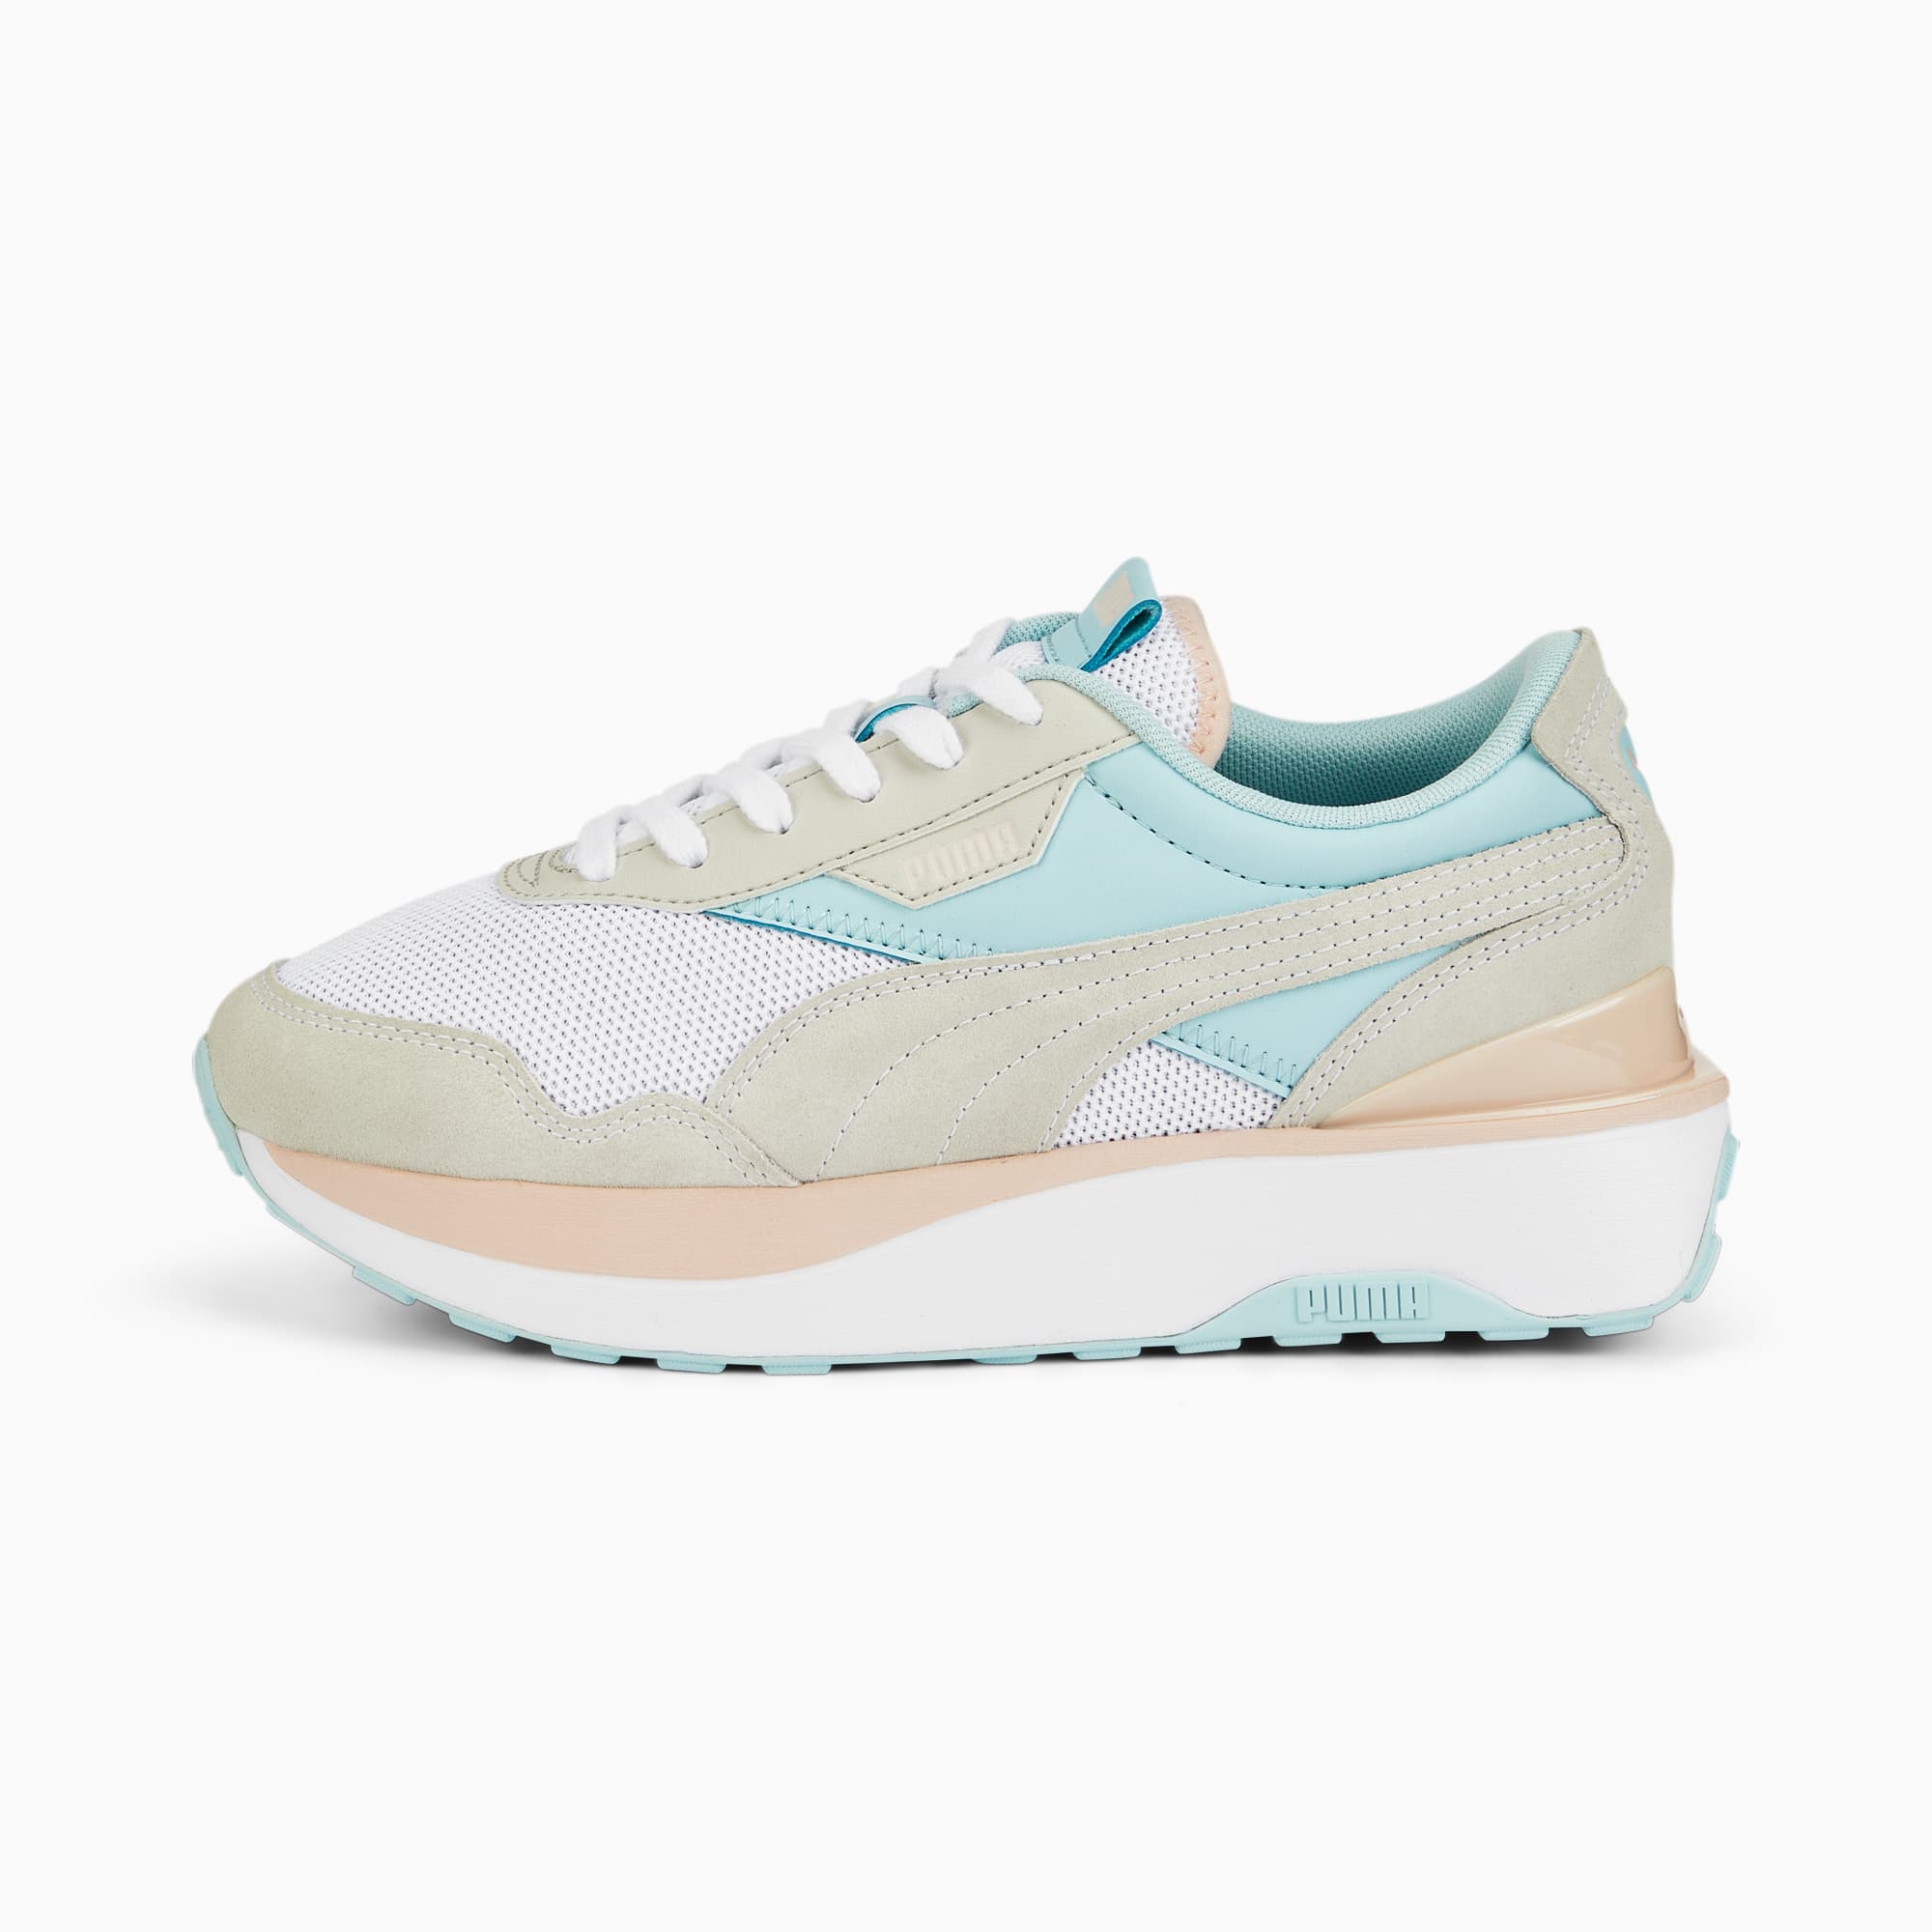 Cruise Rider Candy Women's Sneakers | PUMA